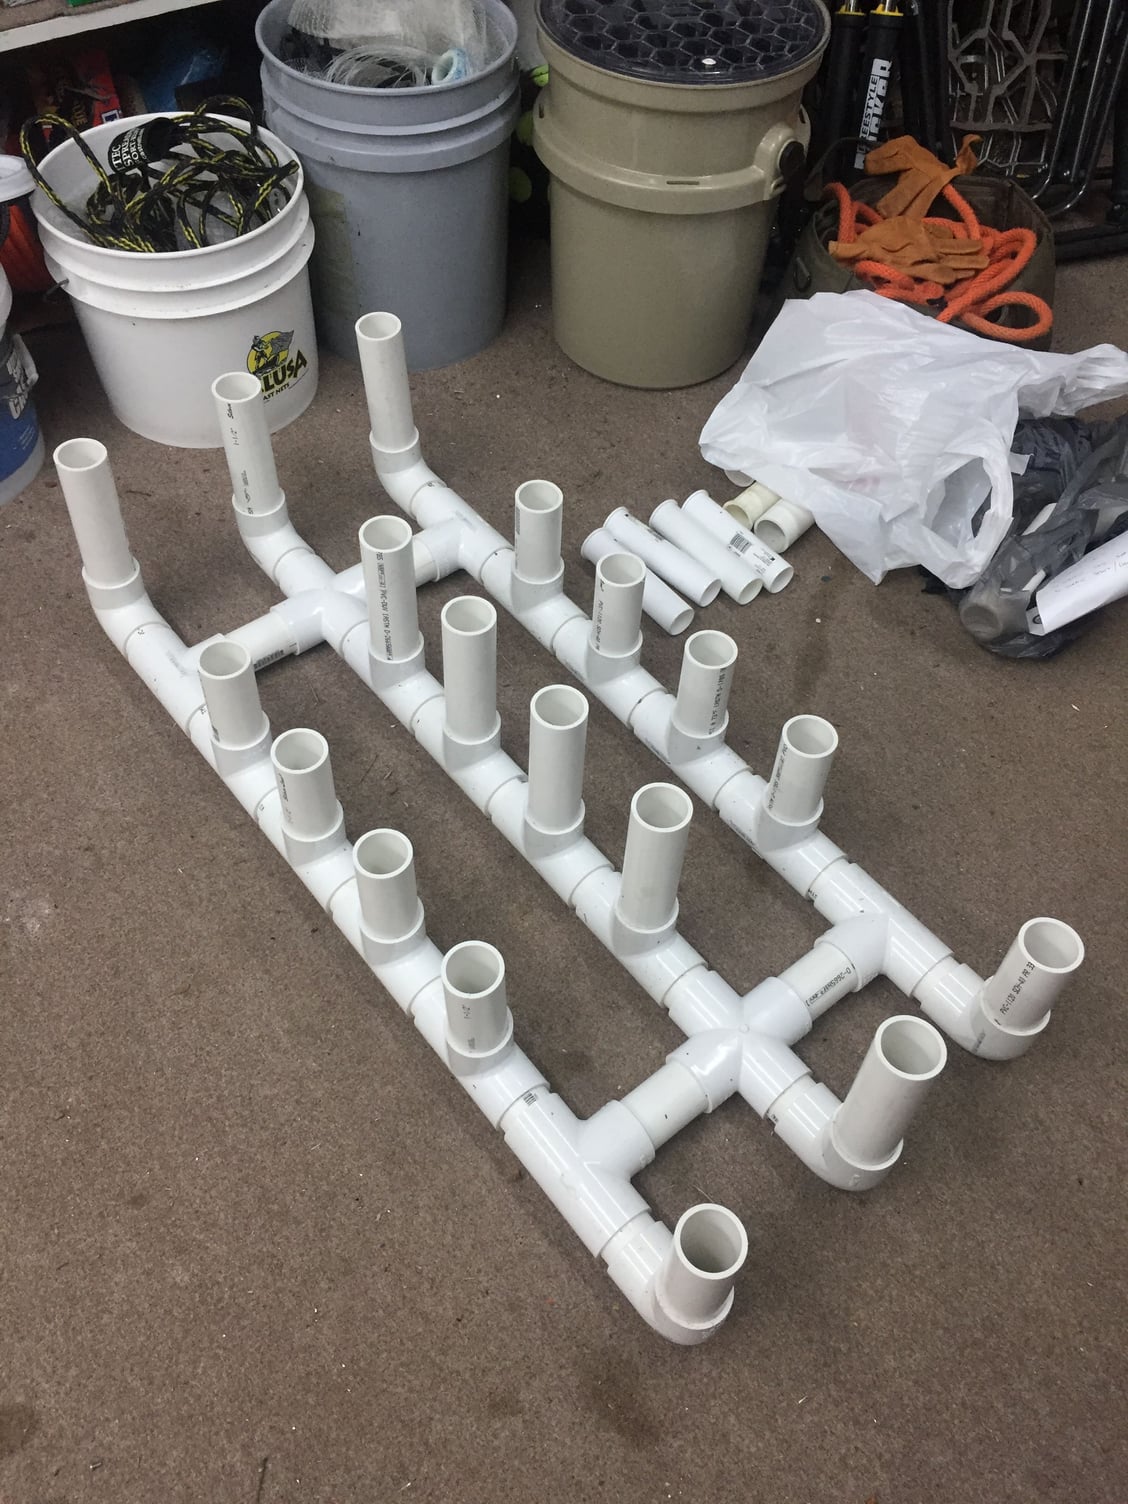 PVC Rod Holder - evening project - The Hull Truth - Boating and Fishing  Forum